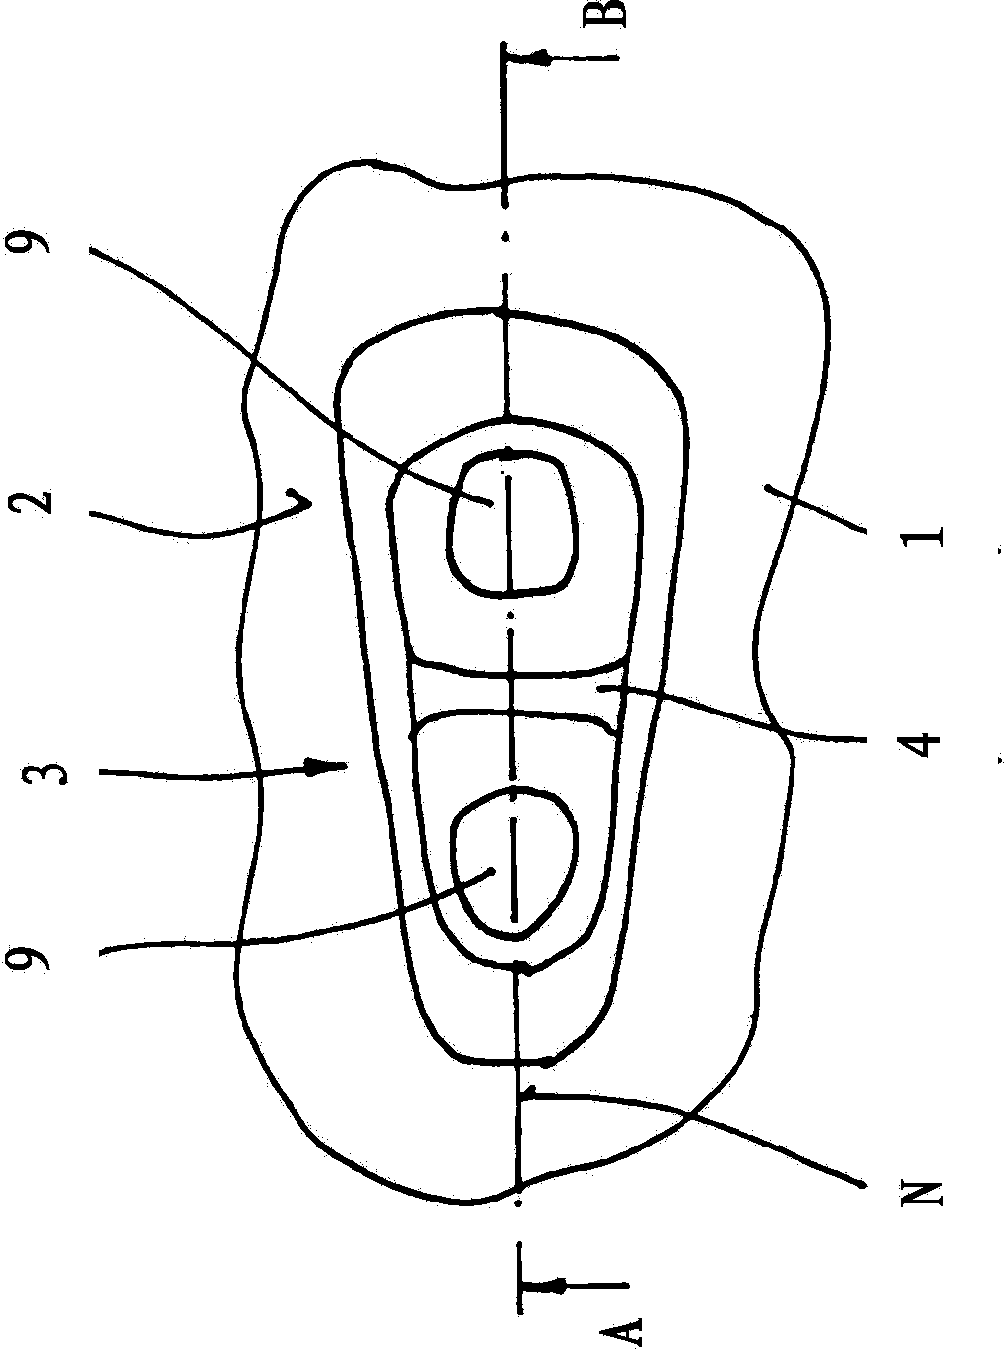 Shoe sole, shoe having such a shoe sole, and method for producing the shoe sole